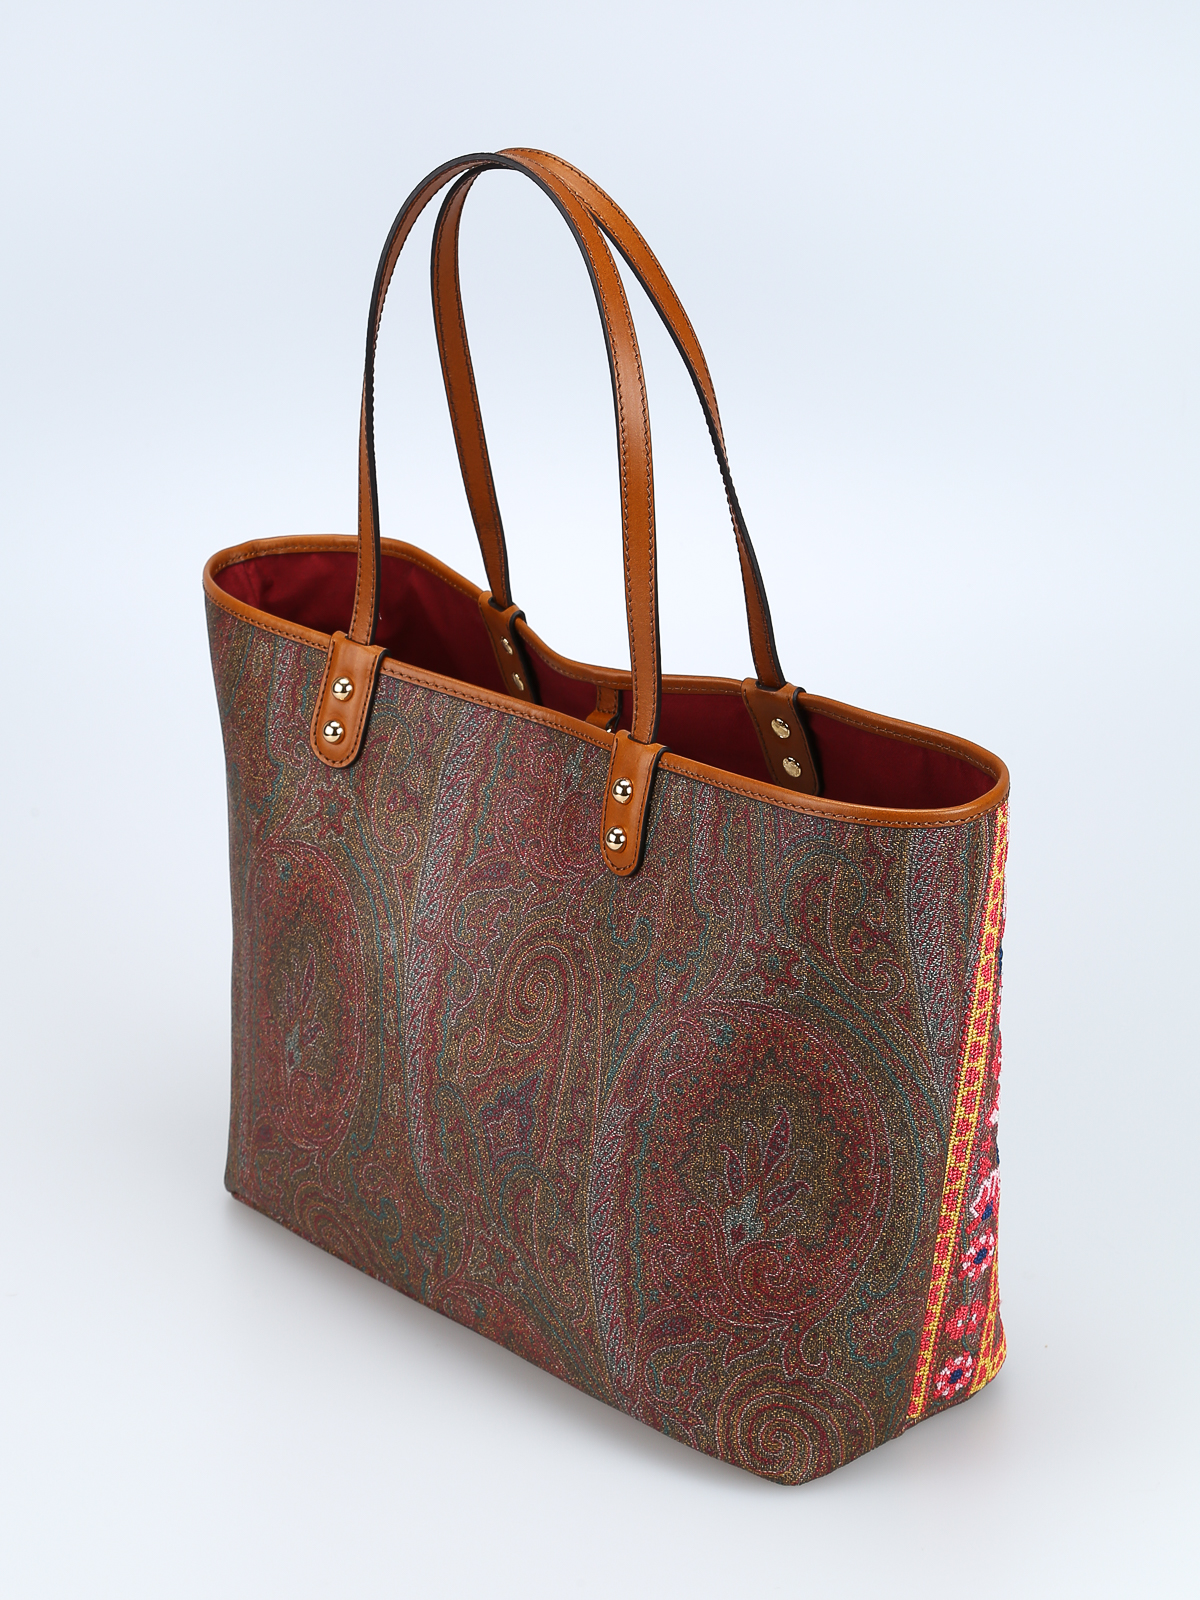 ETRO EMBROIDERED PAISLEY TOTE BAG